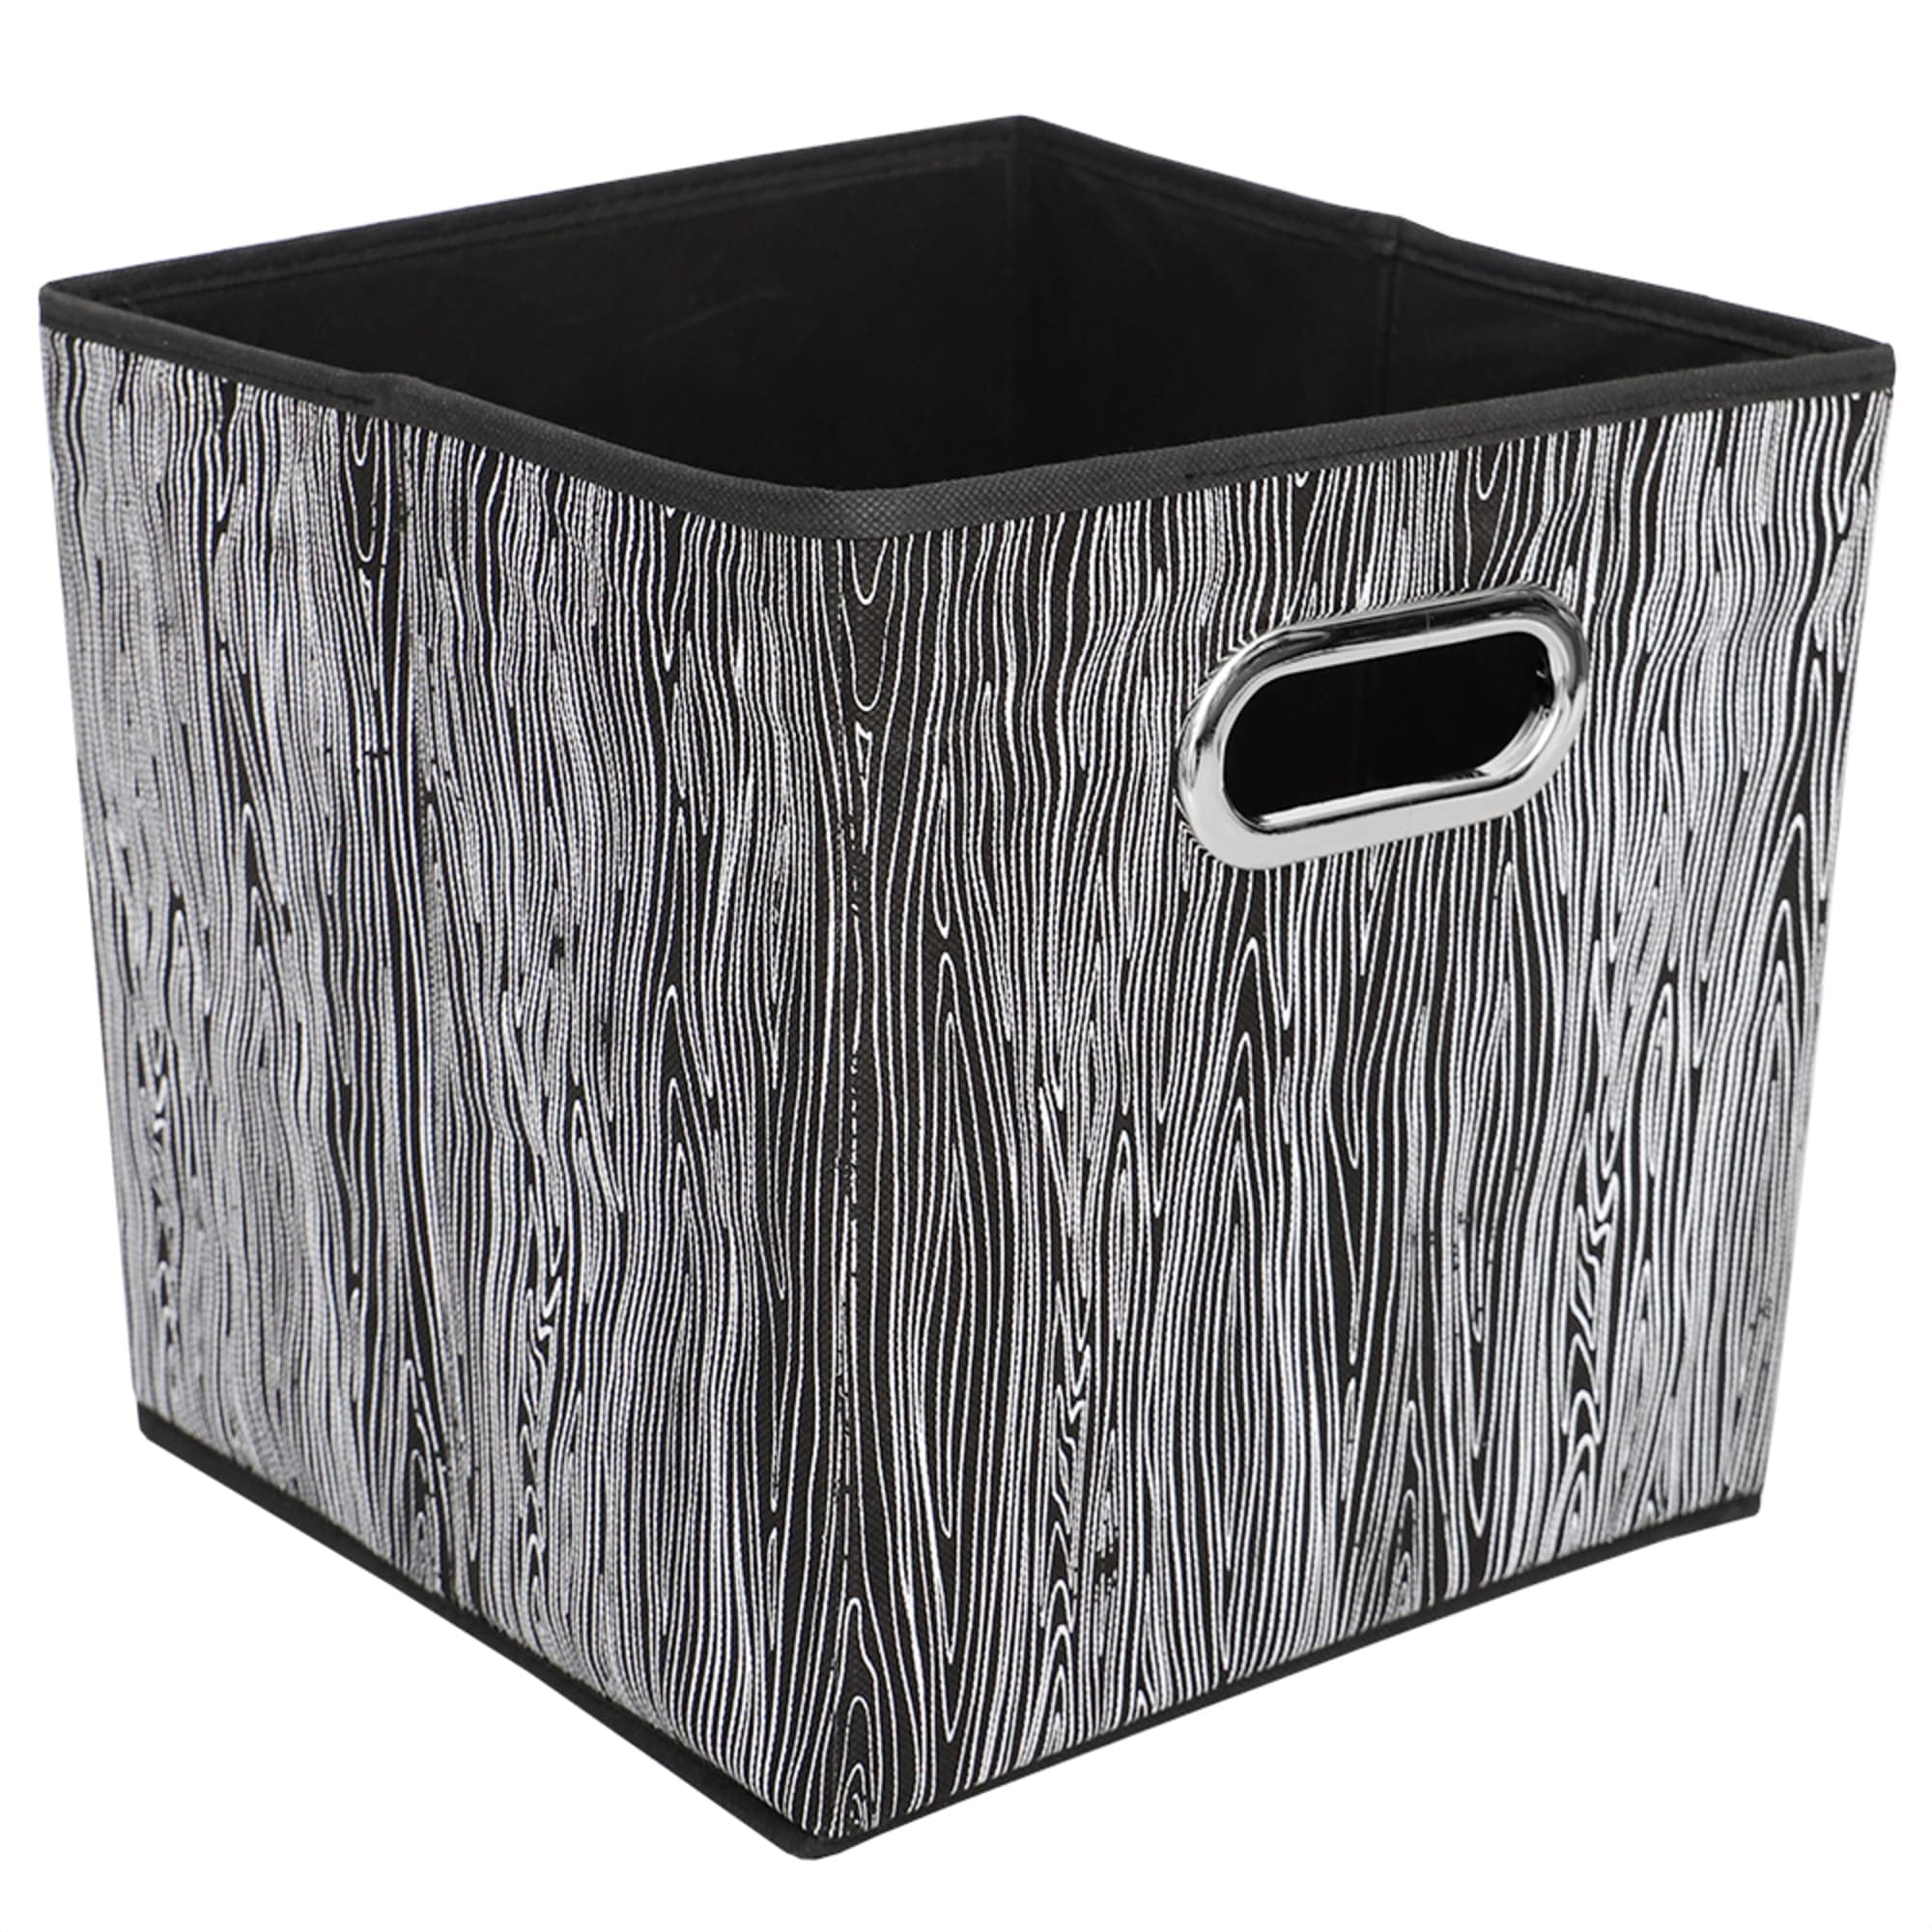 Home Basics Wood Tone Collapsible Non-Woven Storage Bin with Grommet Handle, Black $5.00 EACH, CASE PACK OF 12